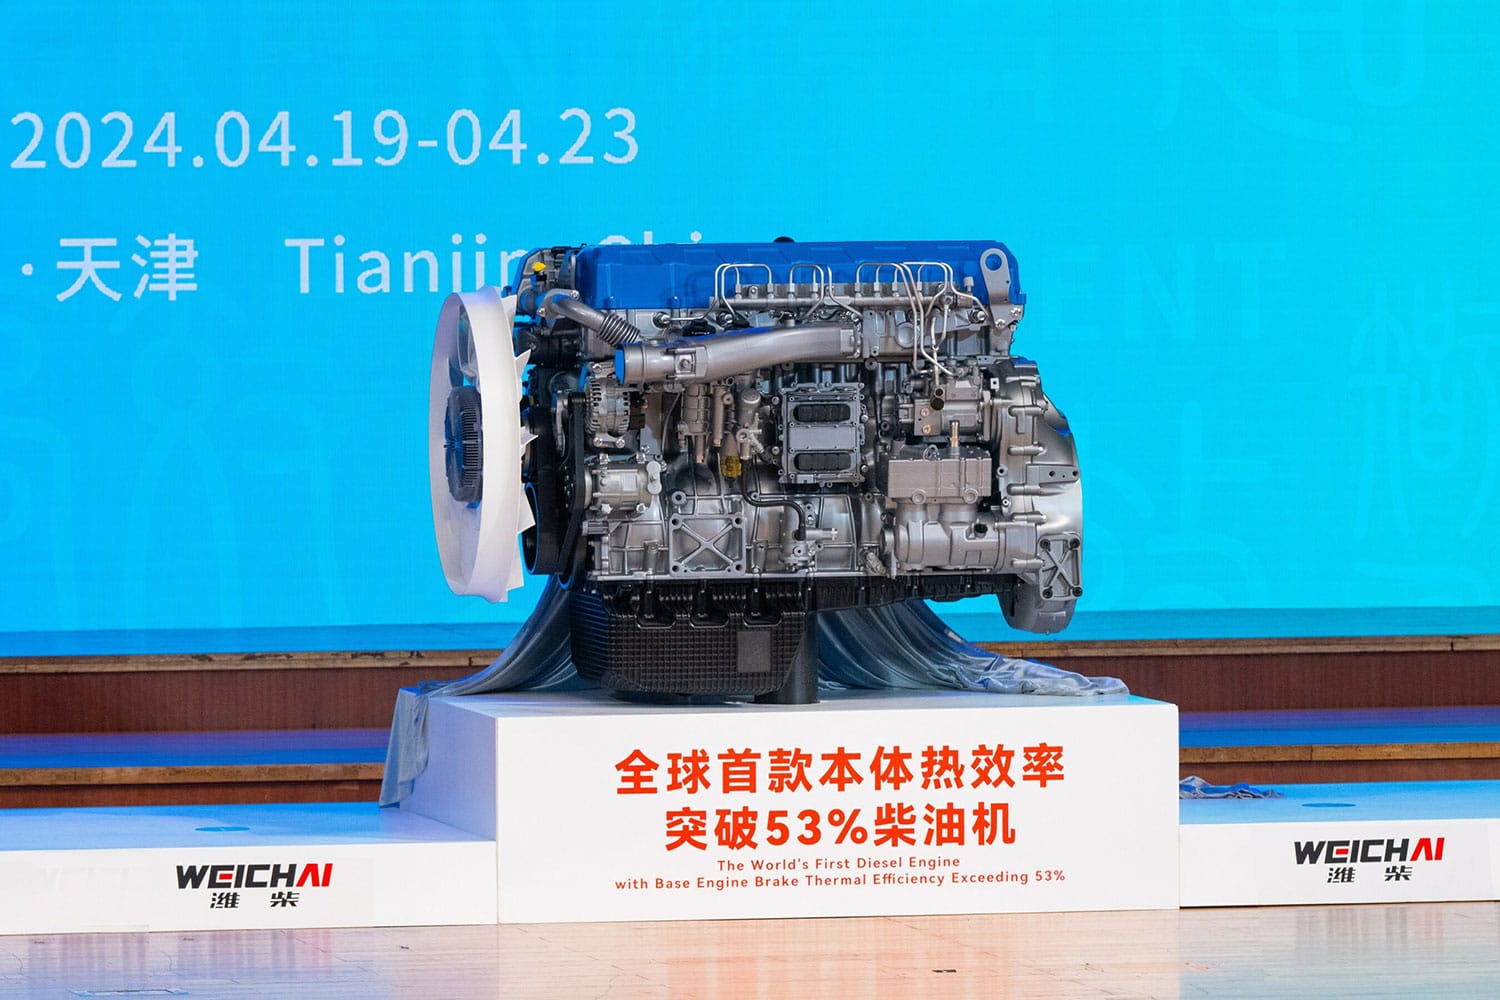 Weichai Power unveiled the world's first diesel engine with an intrinsic thermal efficiency of 53.09%.